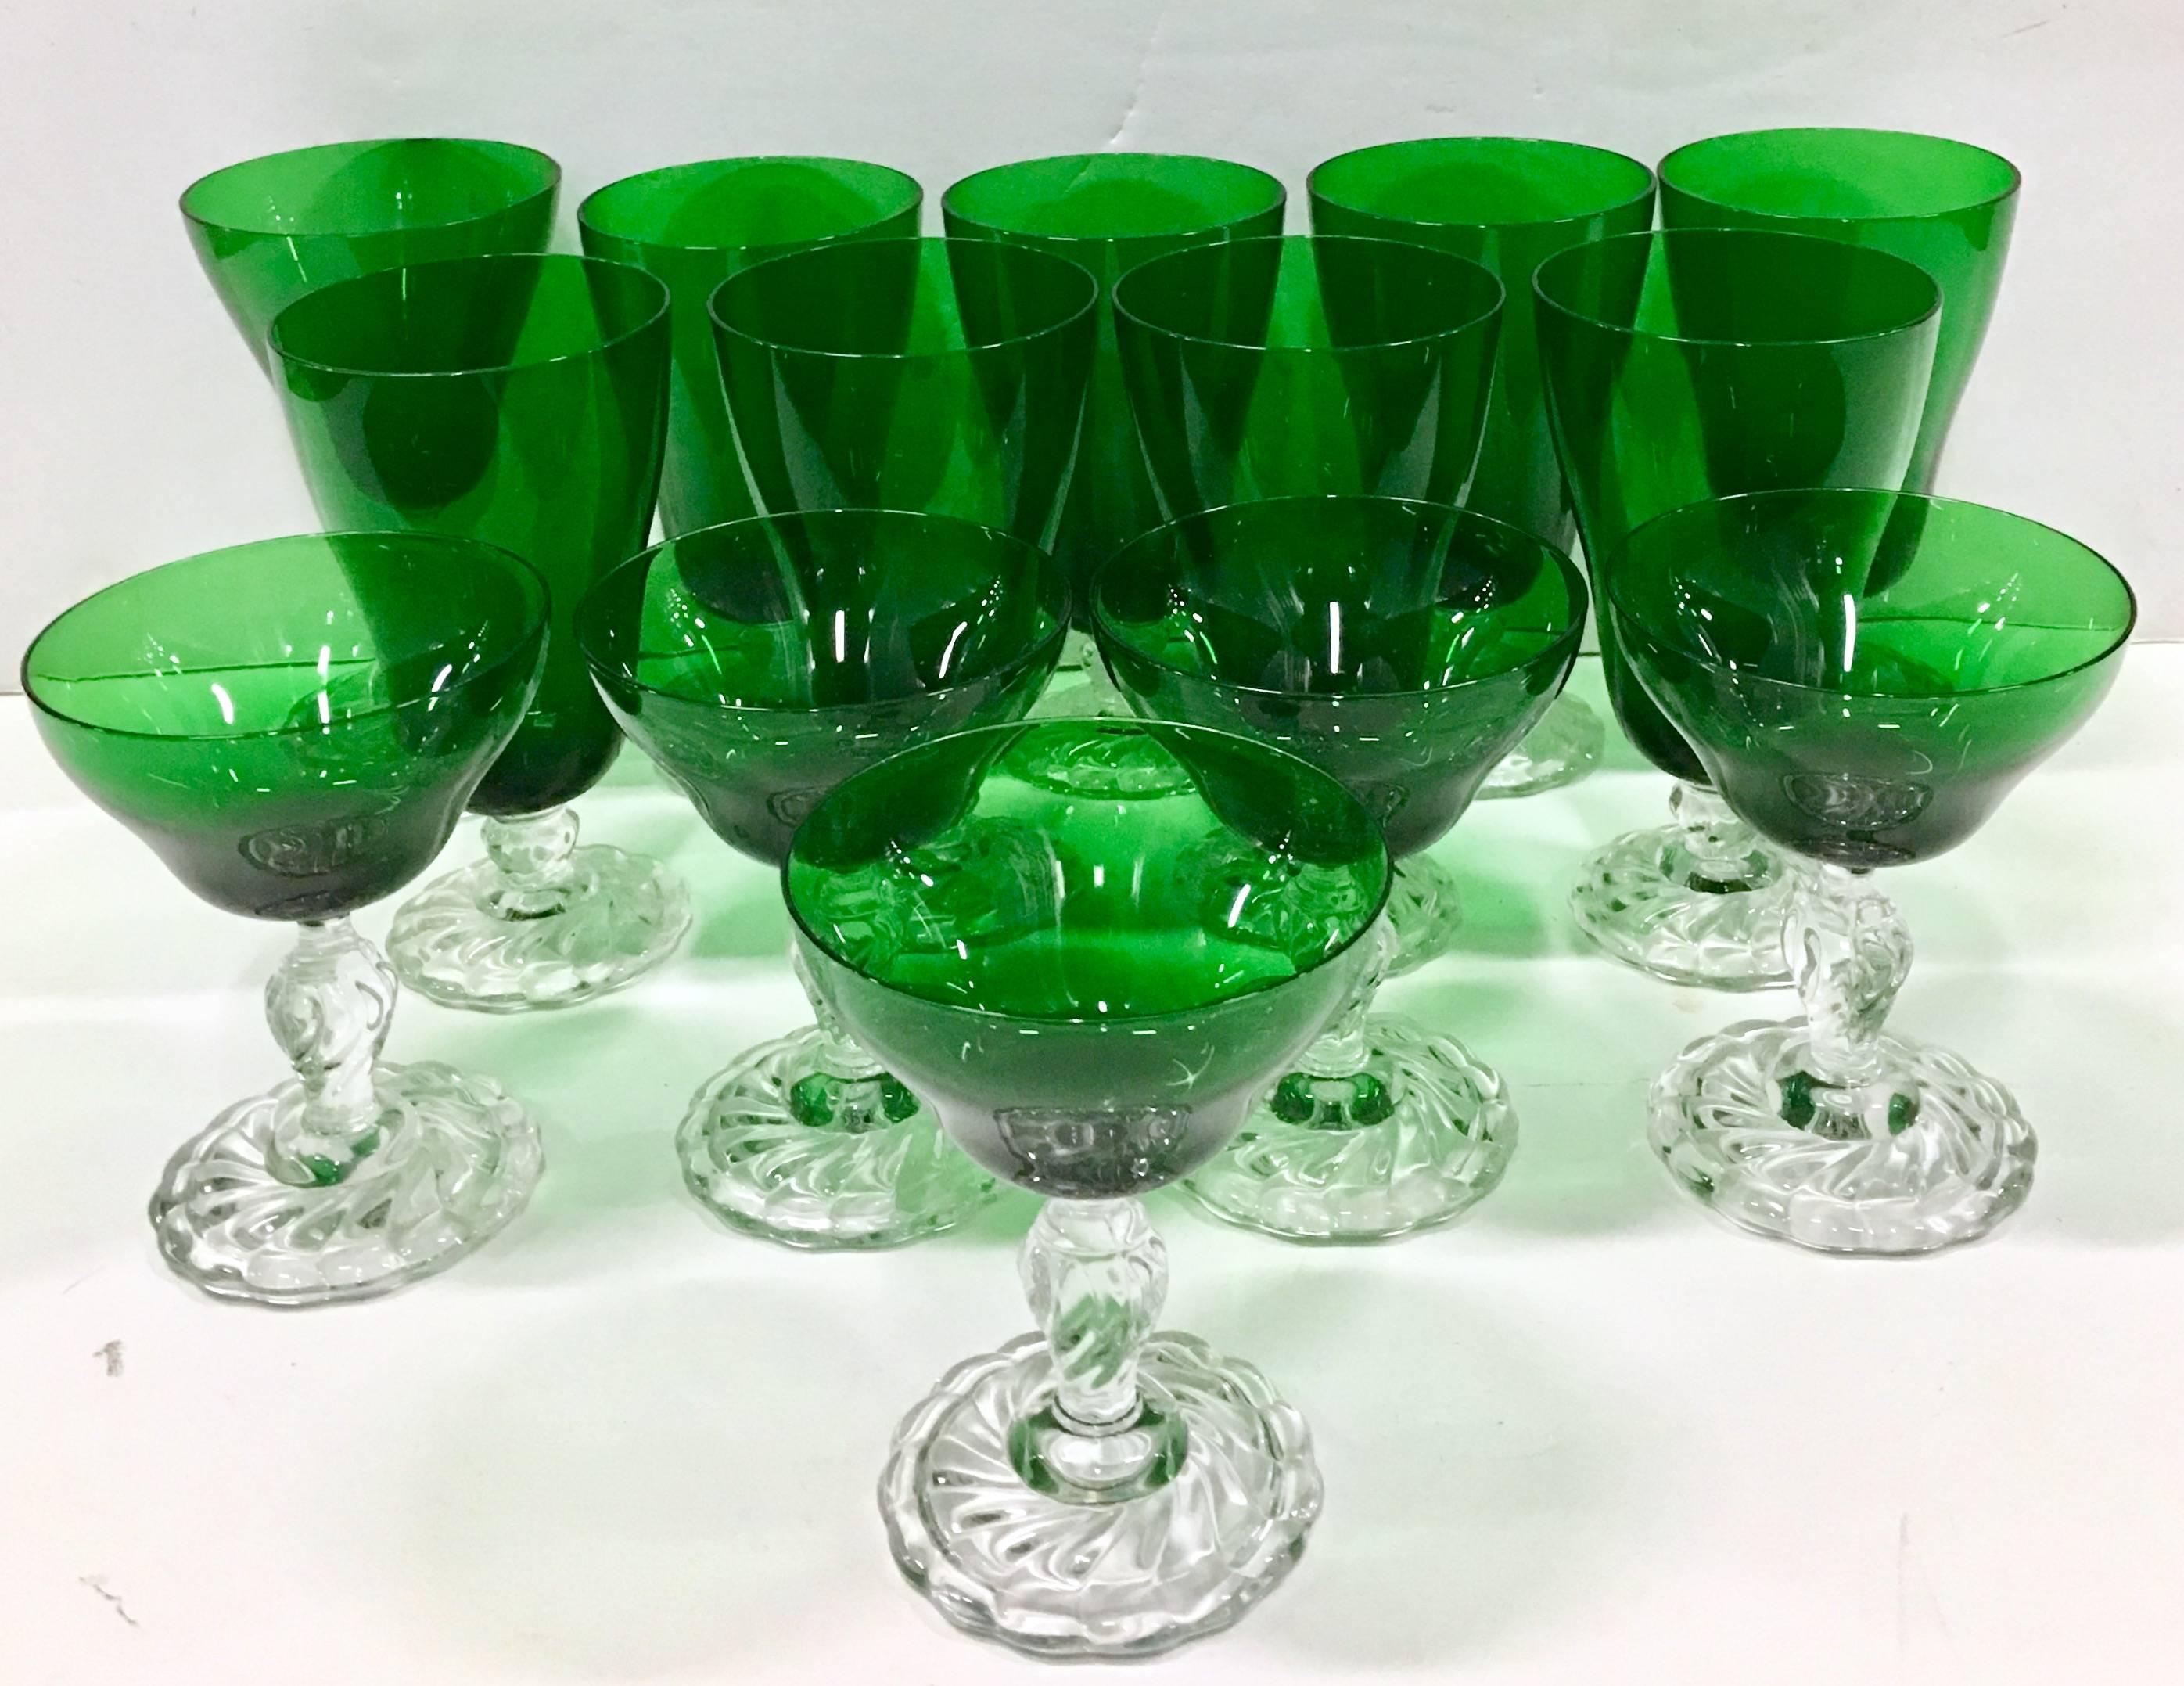 1960s Emerald Green and Clear Stem Drink Glasses, Set of Fourteen Pieces. Set Includes, nine goblets and five coupe glasses.
Coupe Glass: 4.5